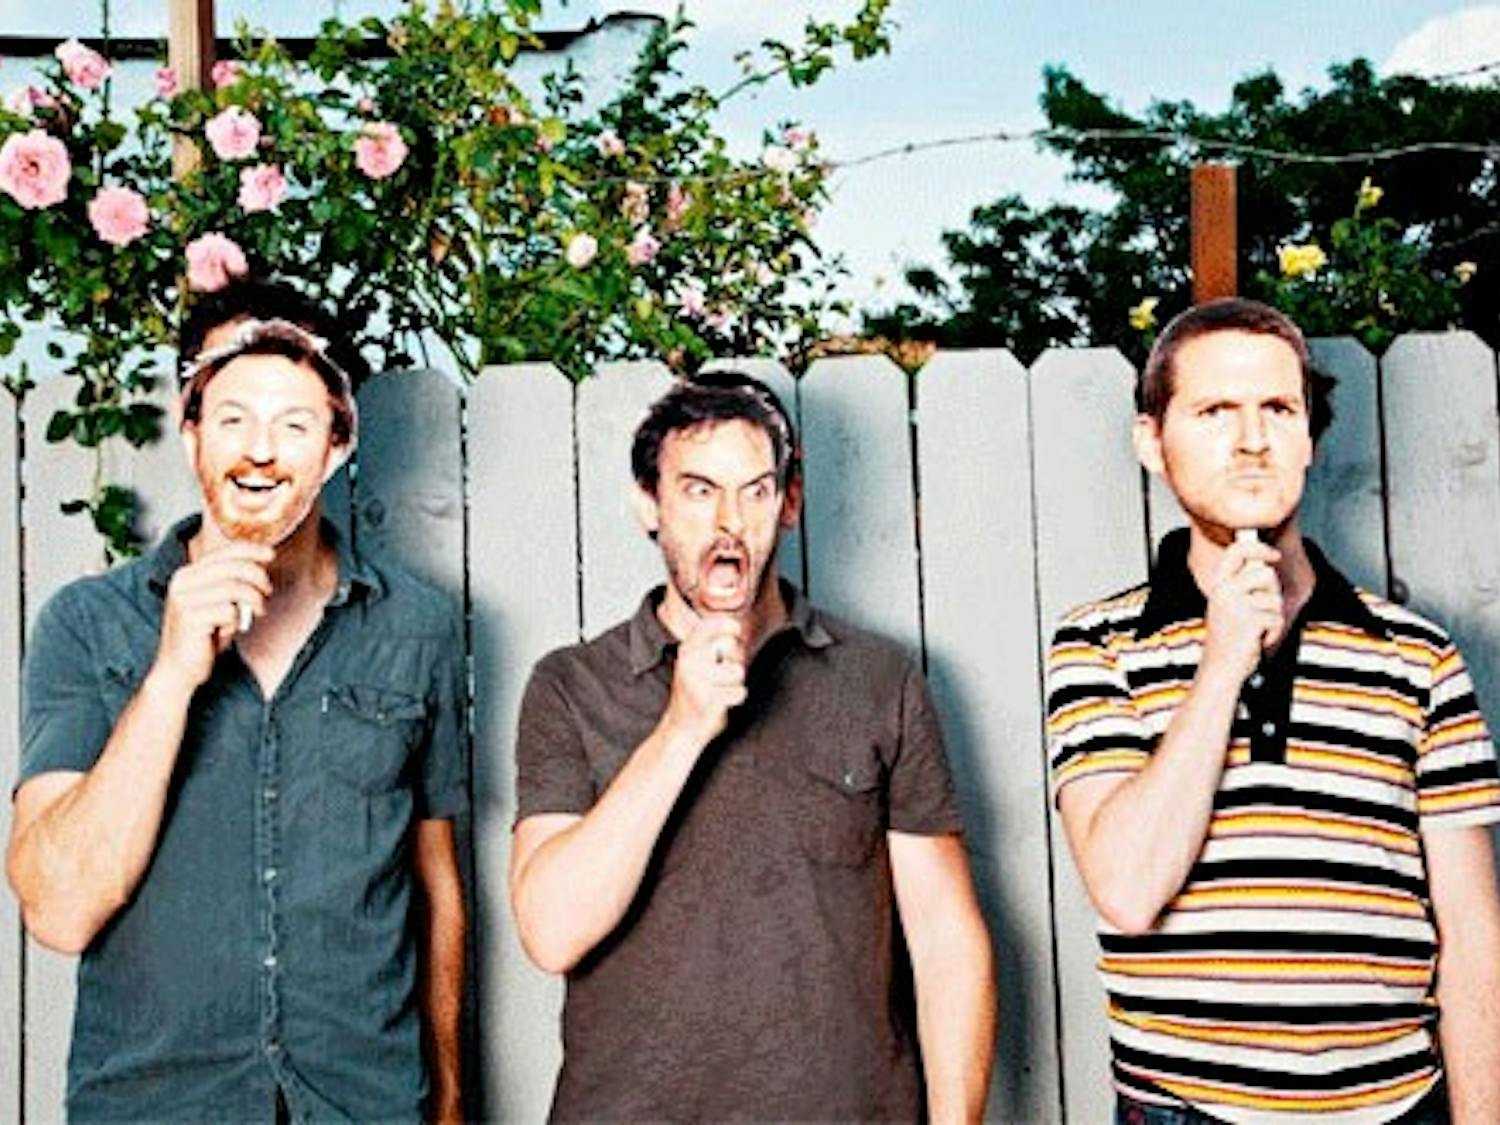 Guster loses its gusto, makes annoying album